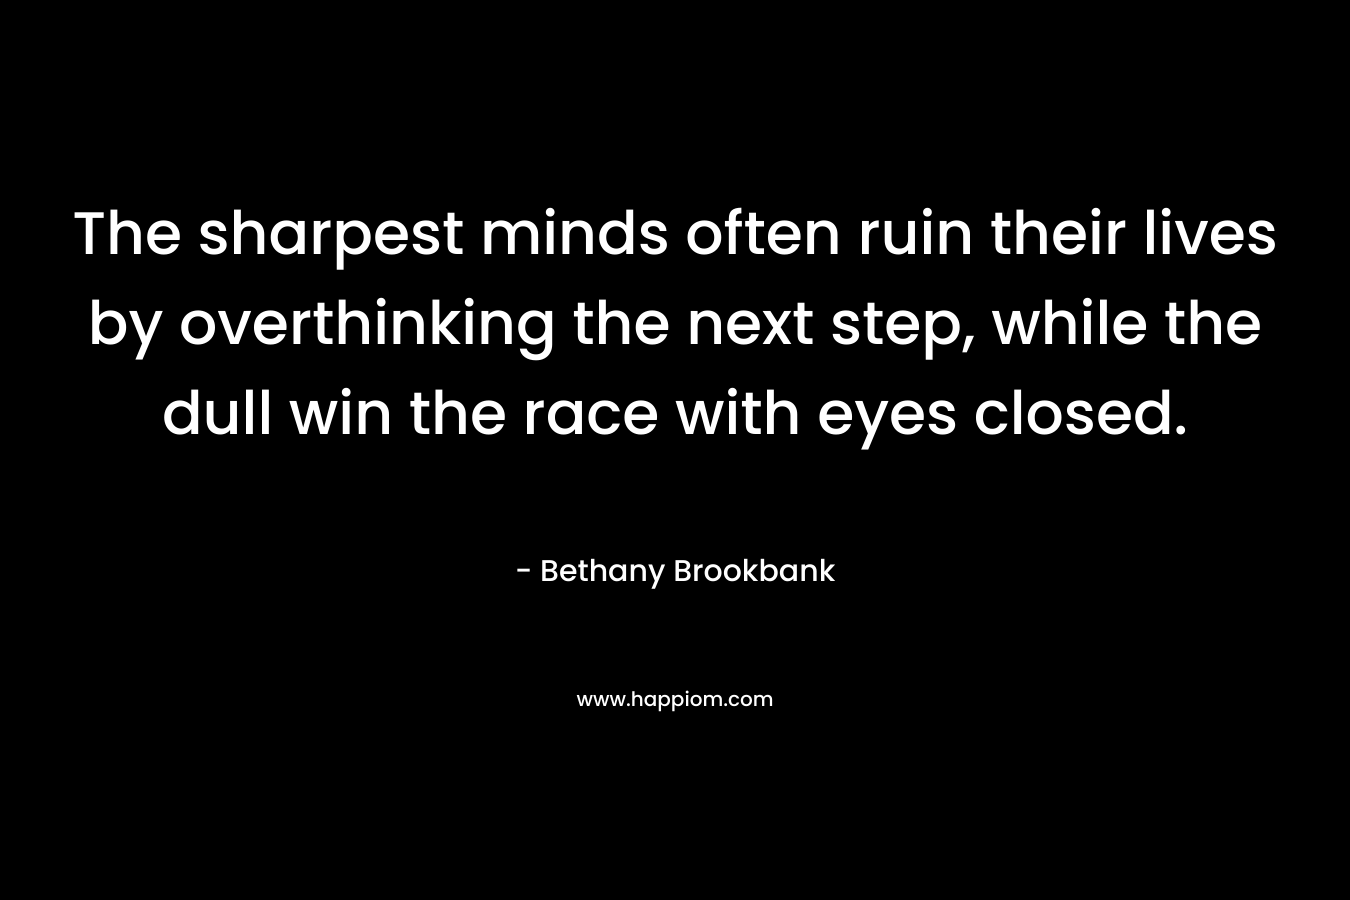 The sharpest minds often ruin their lives by overthinking the next step, while the dull win the race with eyes closed. – Bethany Brookbank